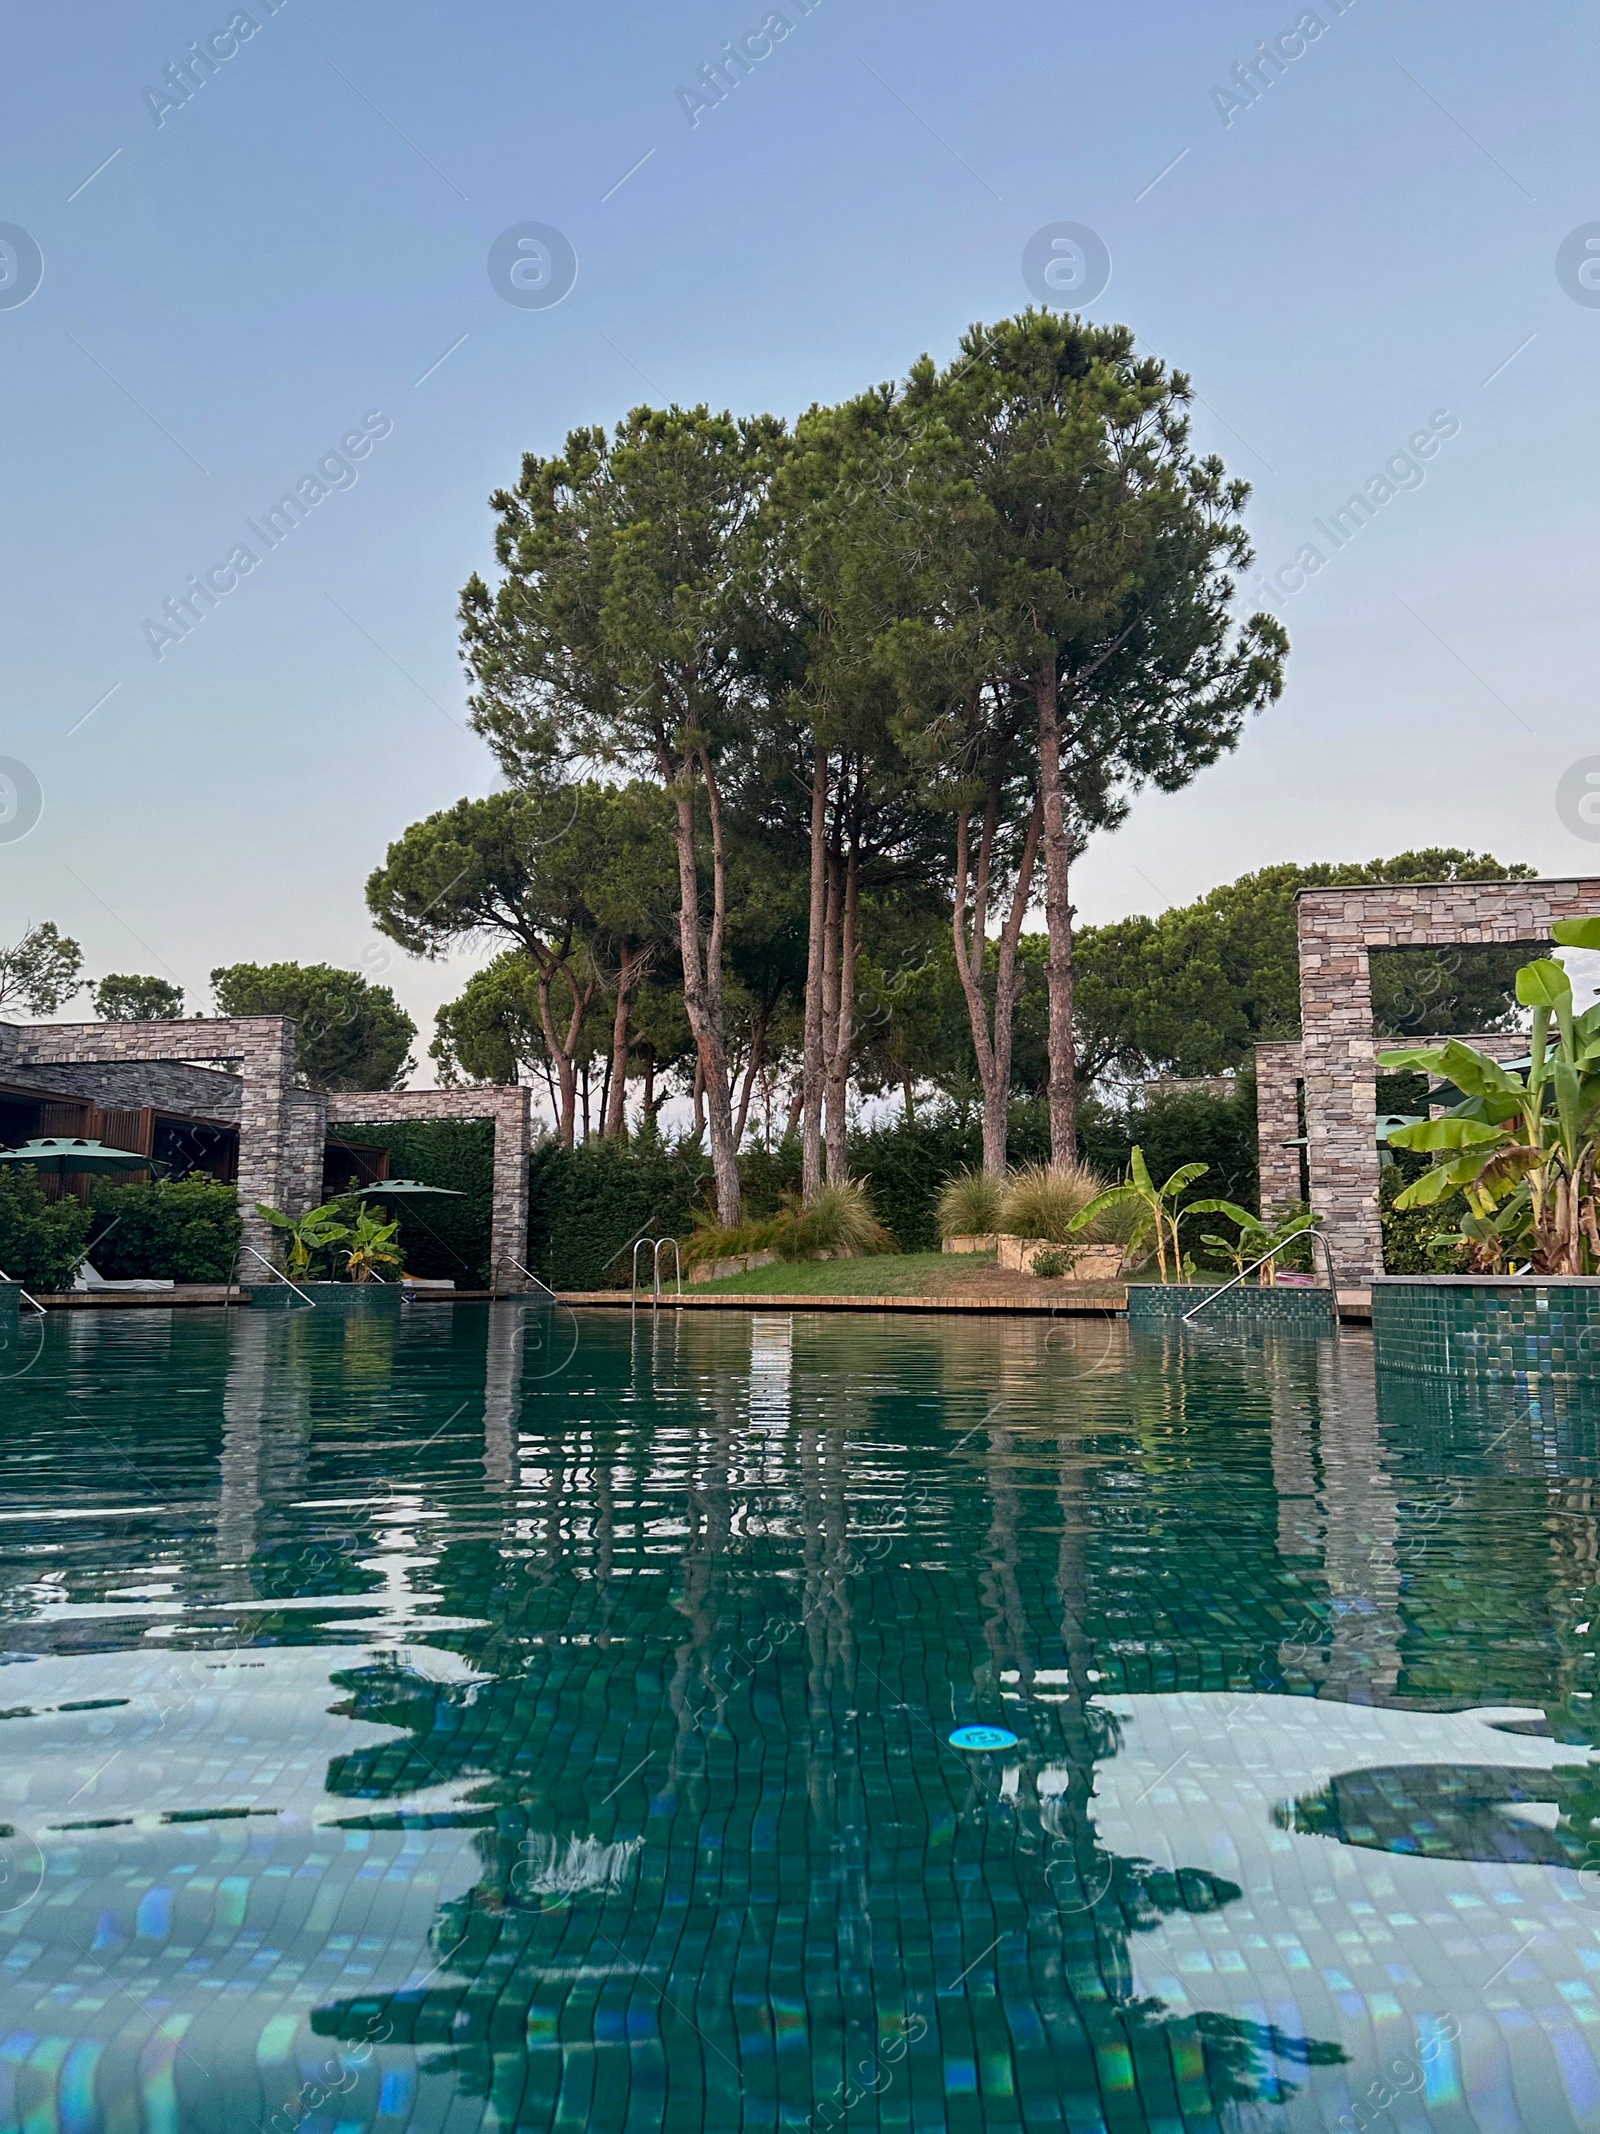 Photo of Swimming pool and tropical plants at luxury resort